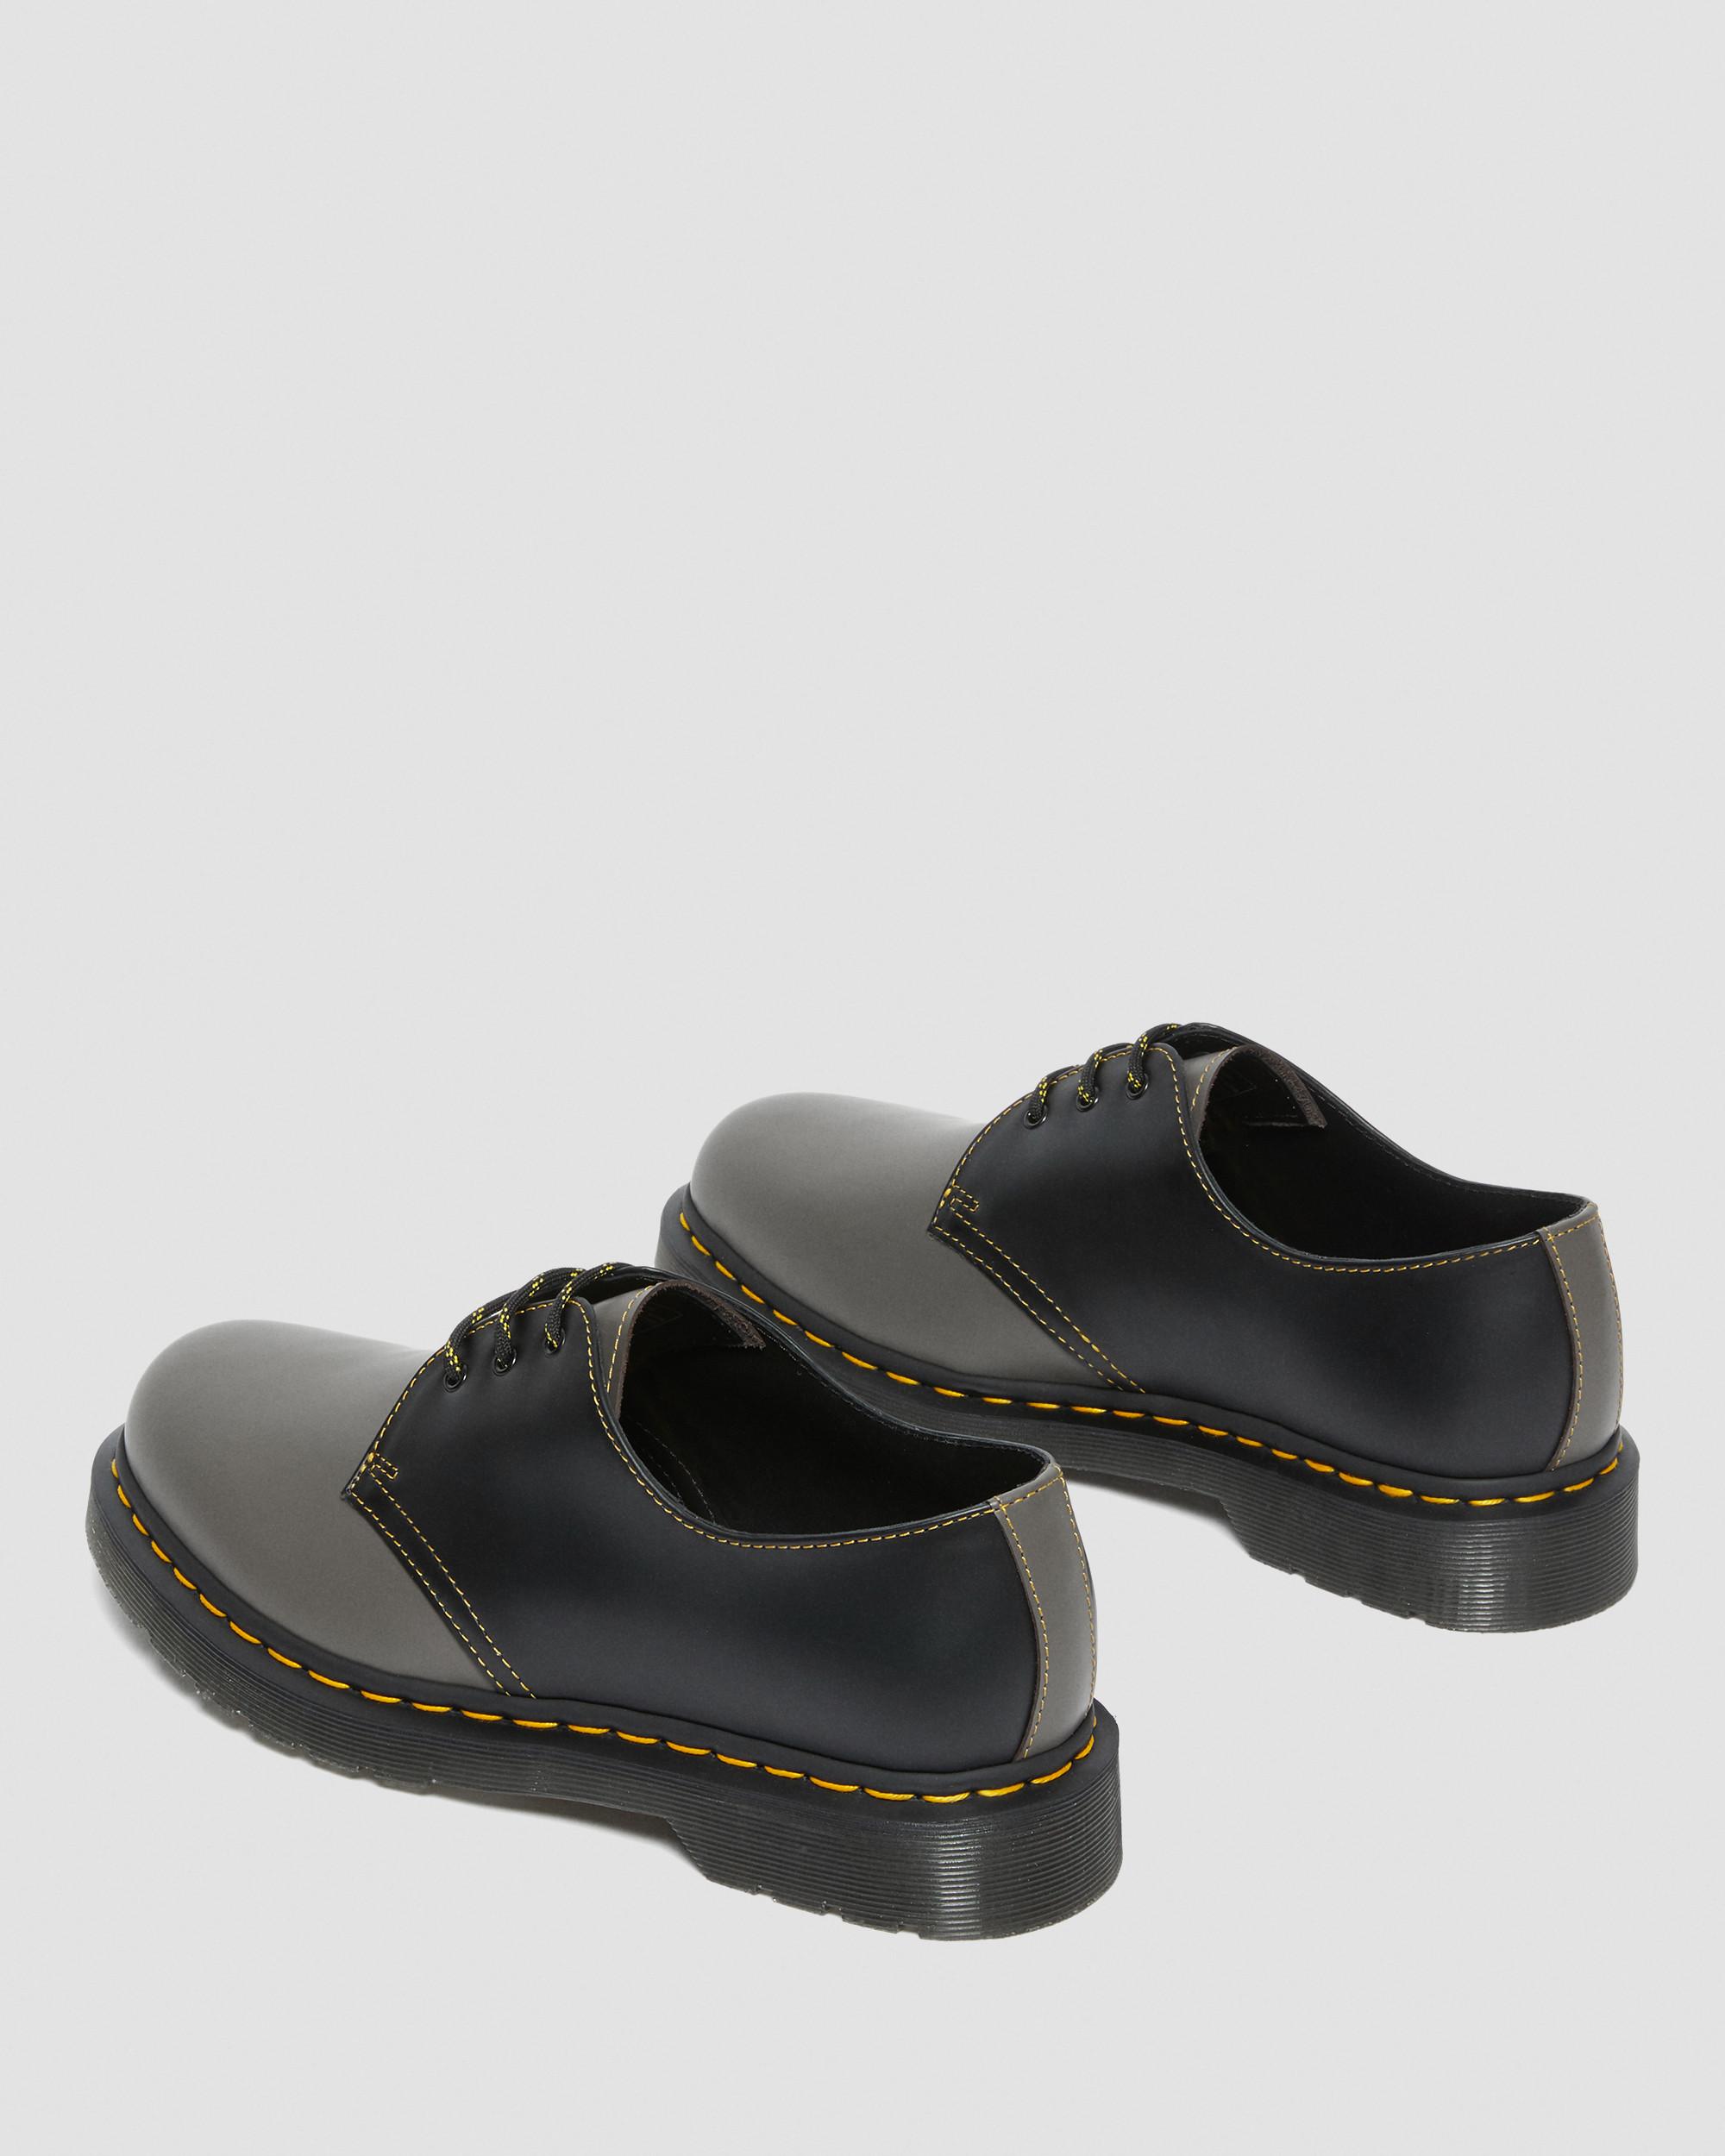 1461 Contrast Stitch Smooth Leather Oxford Shoes in Charcoal | Dr